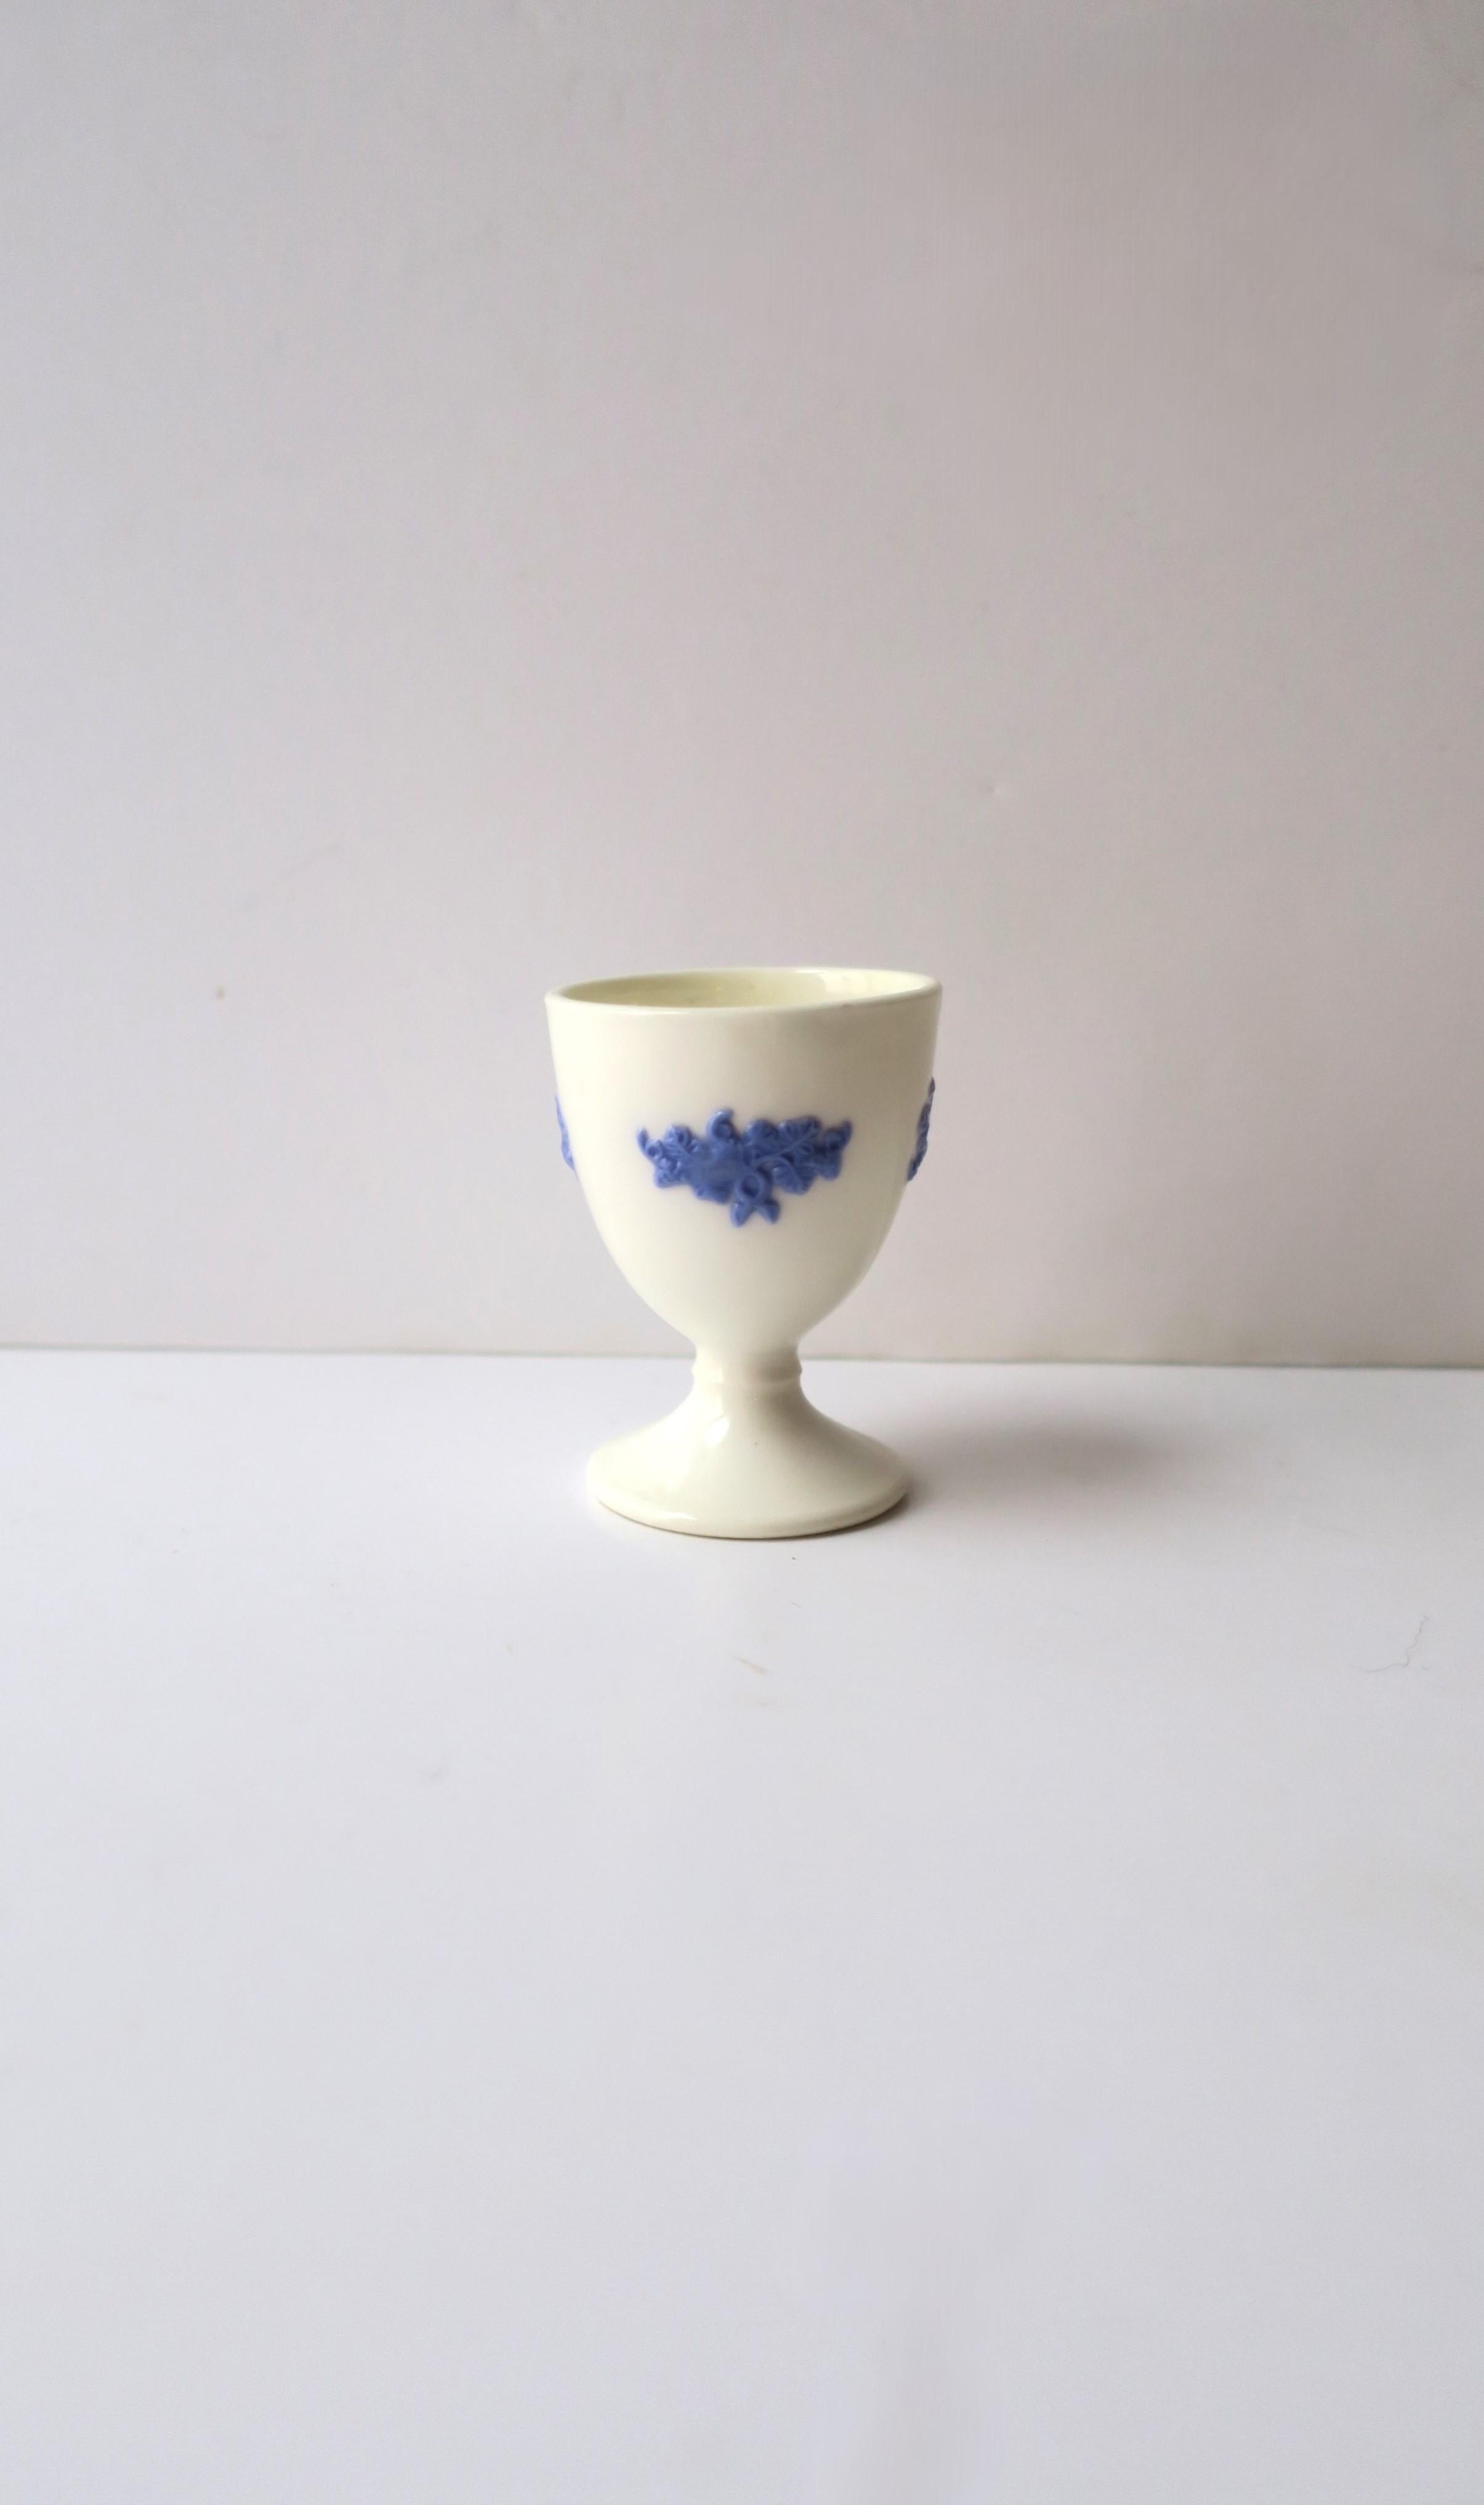 A beautiful blue and white porcelain egg holder cup, circa early-20th century. A predominantly white porcelain egg cup with applied blue porcelain detail of small leaves and vines. 

English pitcher shown available separately, search 1stDibs ref. #: